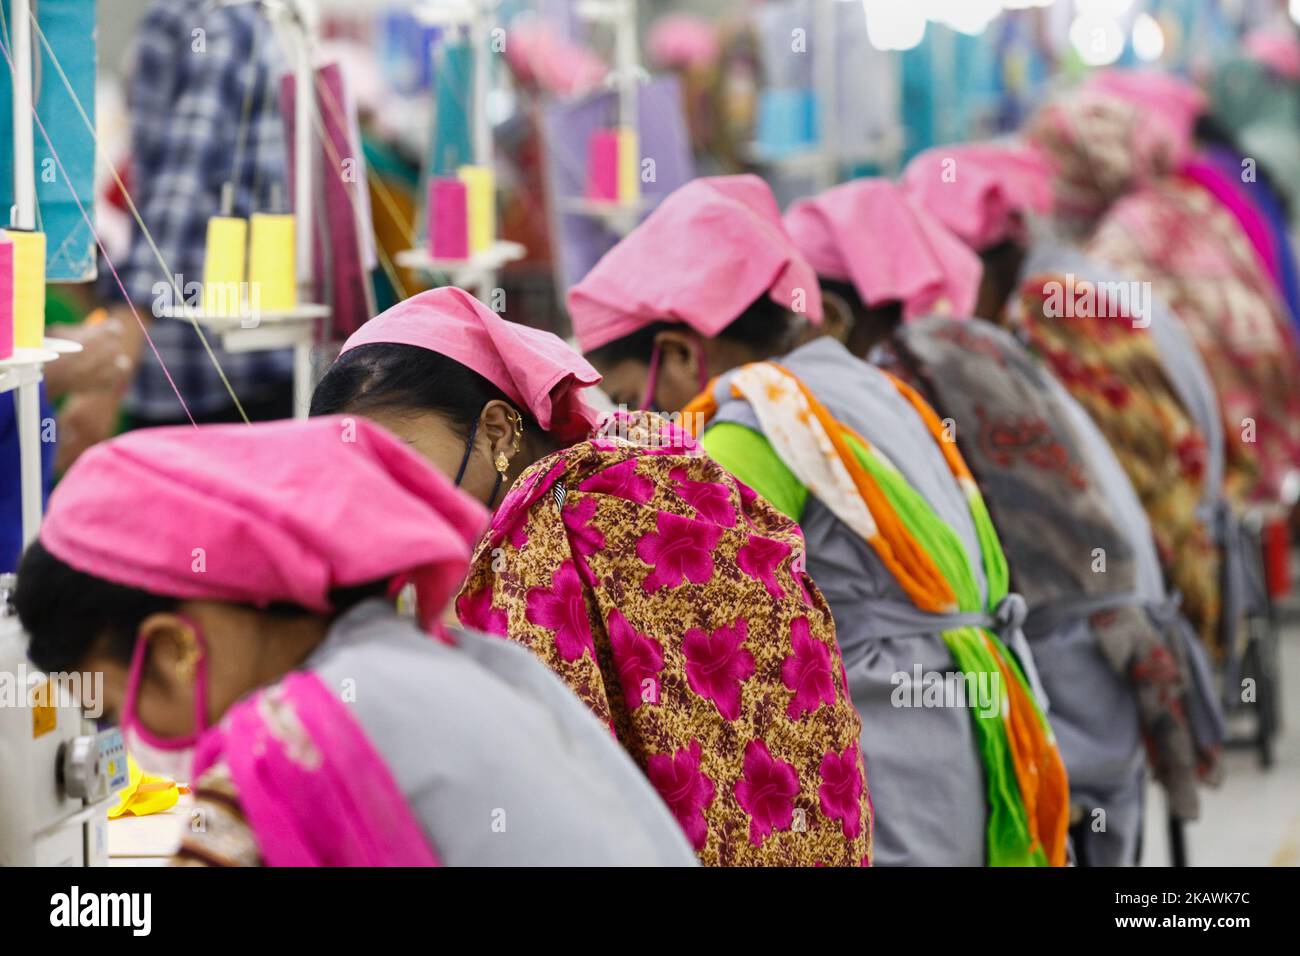 Bangladeshi female workers work at a garments factory in Gazipur outskirts of Dhaka on February 17, 2018. The garment sector has provided employment opportunities to women from the rural areas that previously did not have any opportunity to be part of the formal workforce. This has given women the chance to be financially independent and have a voice in the family because now they contribute financially.However, women workers face problems. Most women come from low income families. Low wage of women workers and their compliance have enabled the industry to compete with the world market.The tex Stock Photo